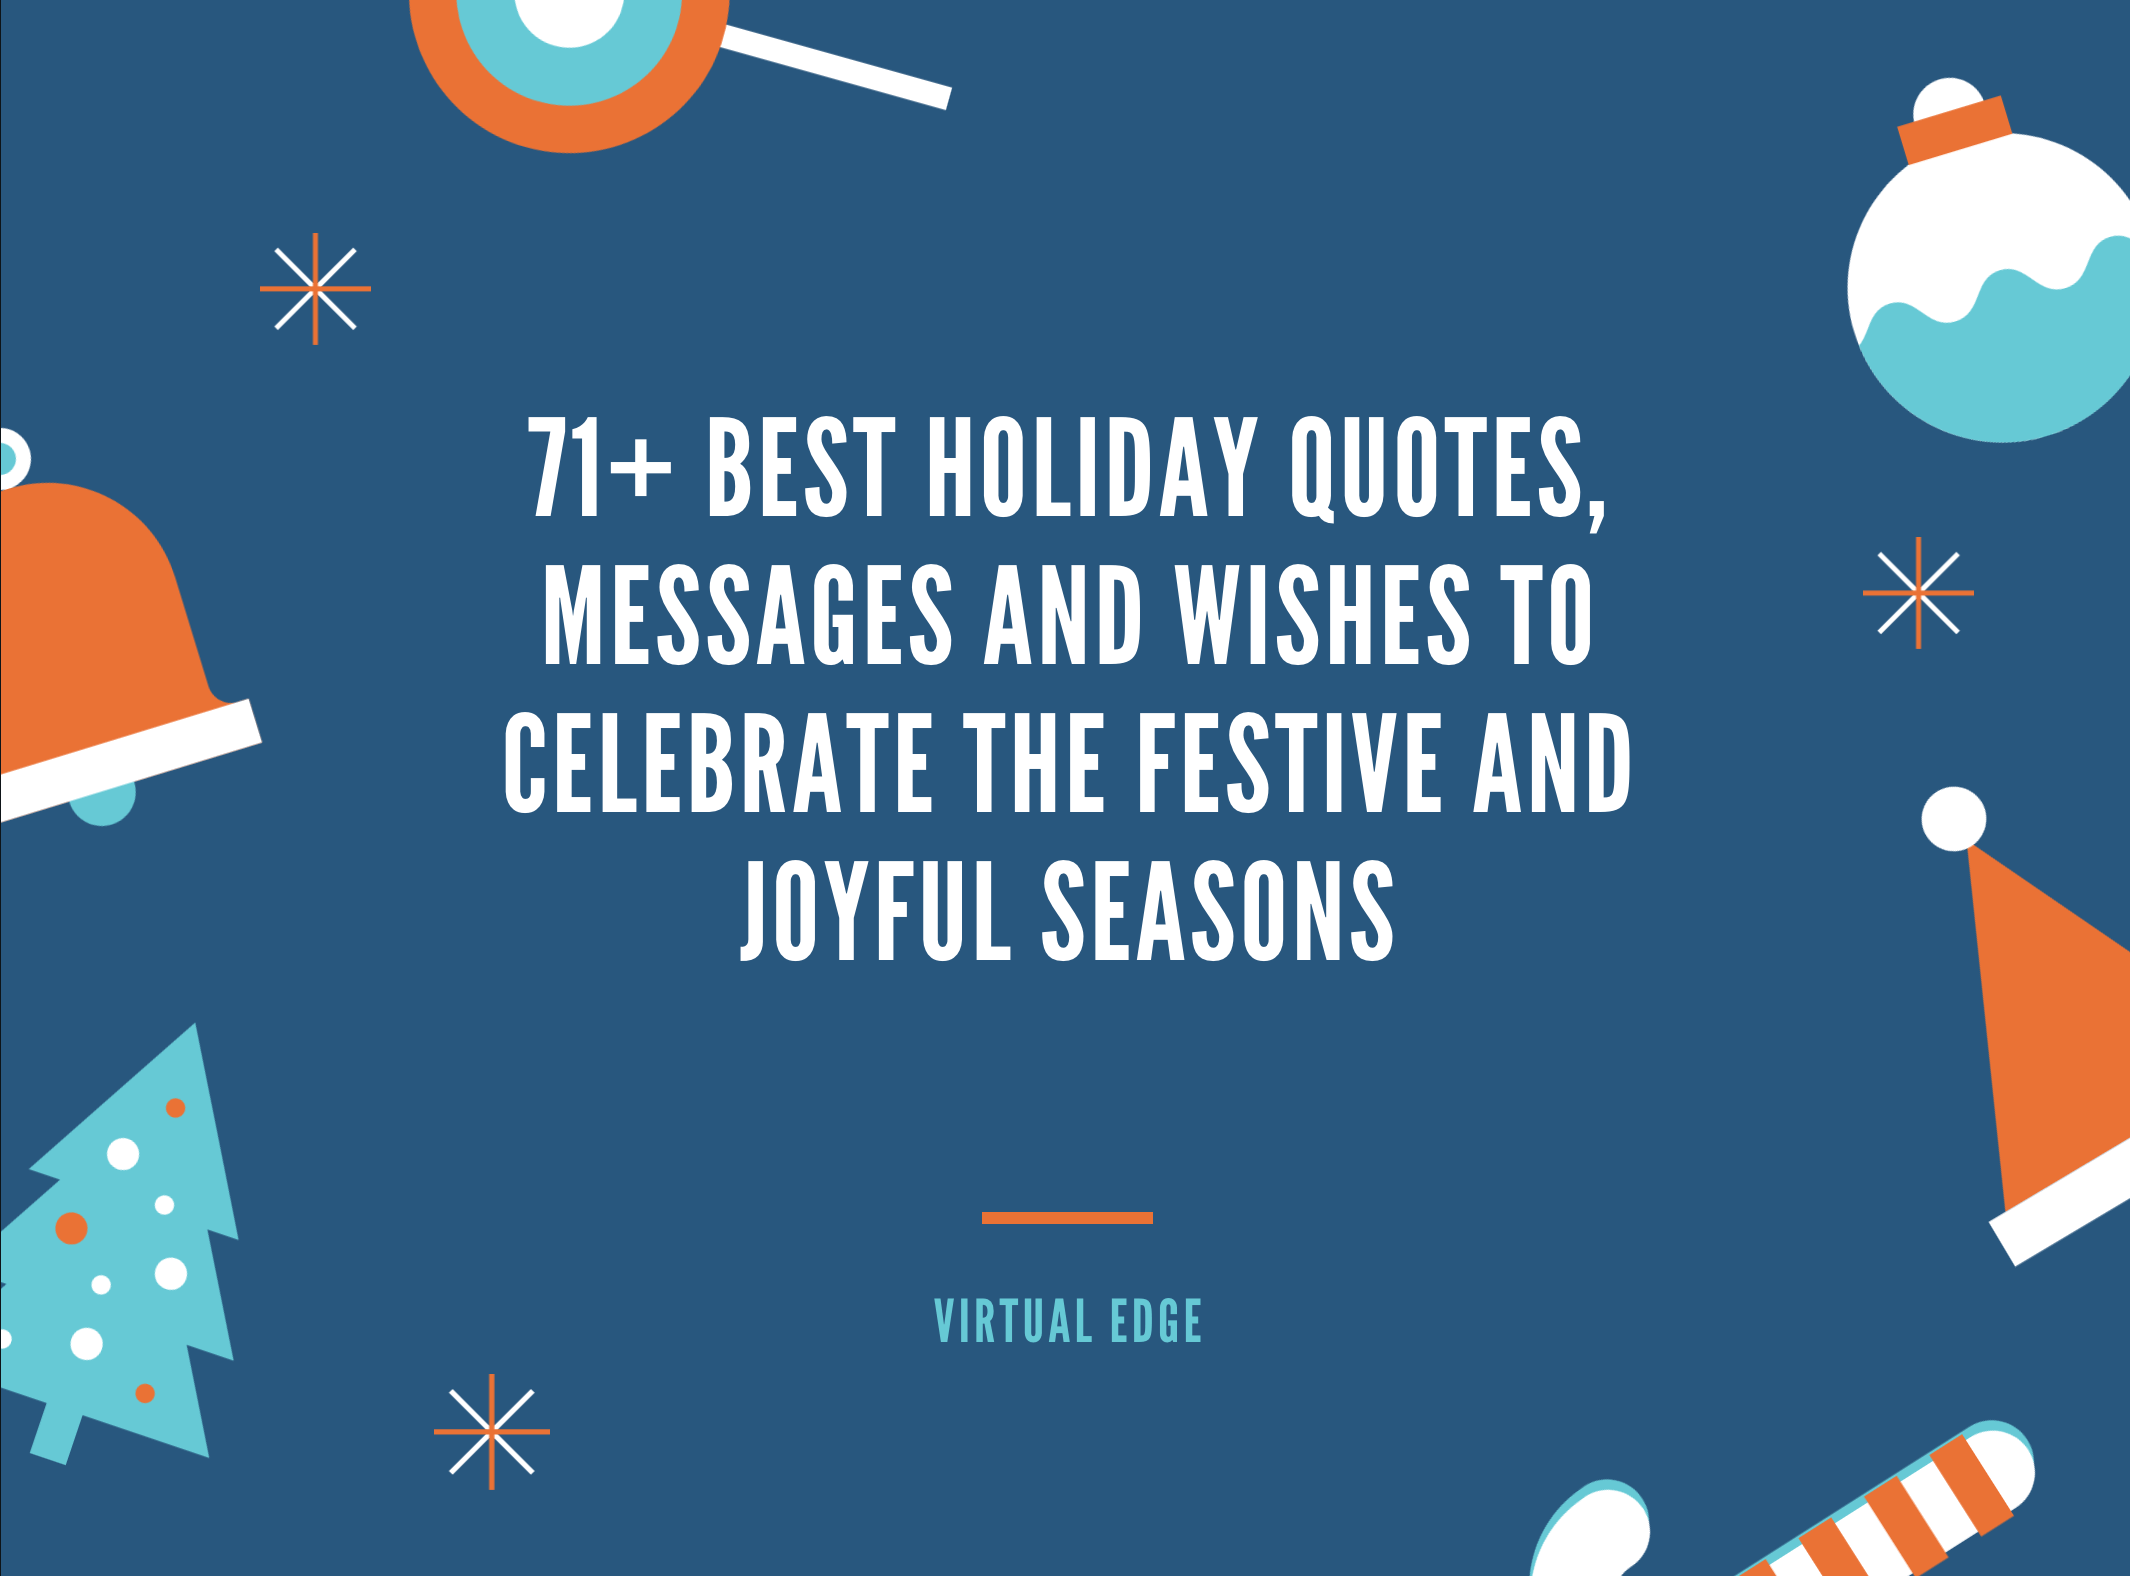 71+ Best Holiday Quotes, Messages and Wishes to Celebrate the Festive and Joyful Seasons